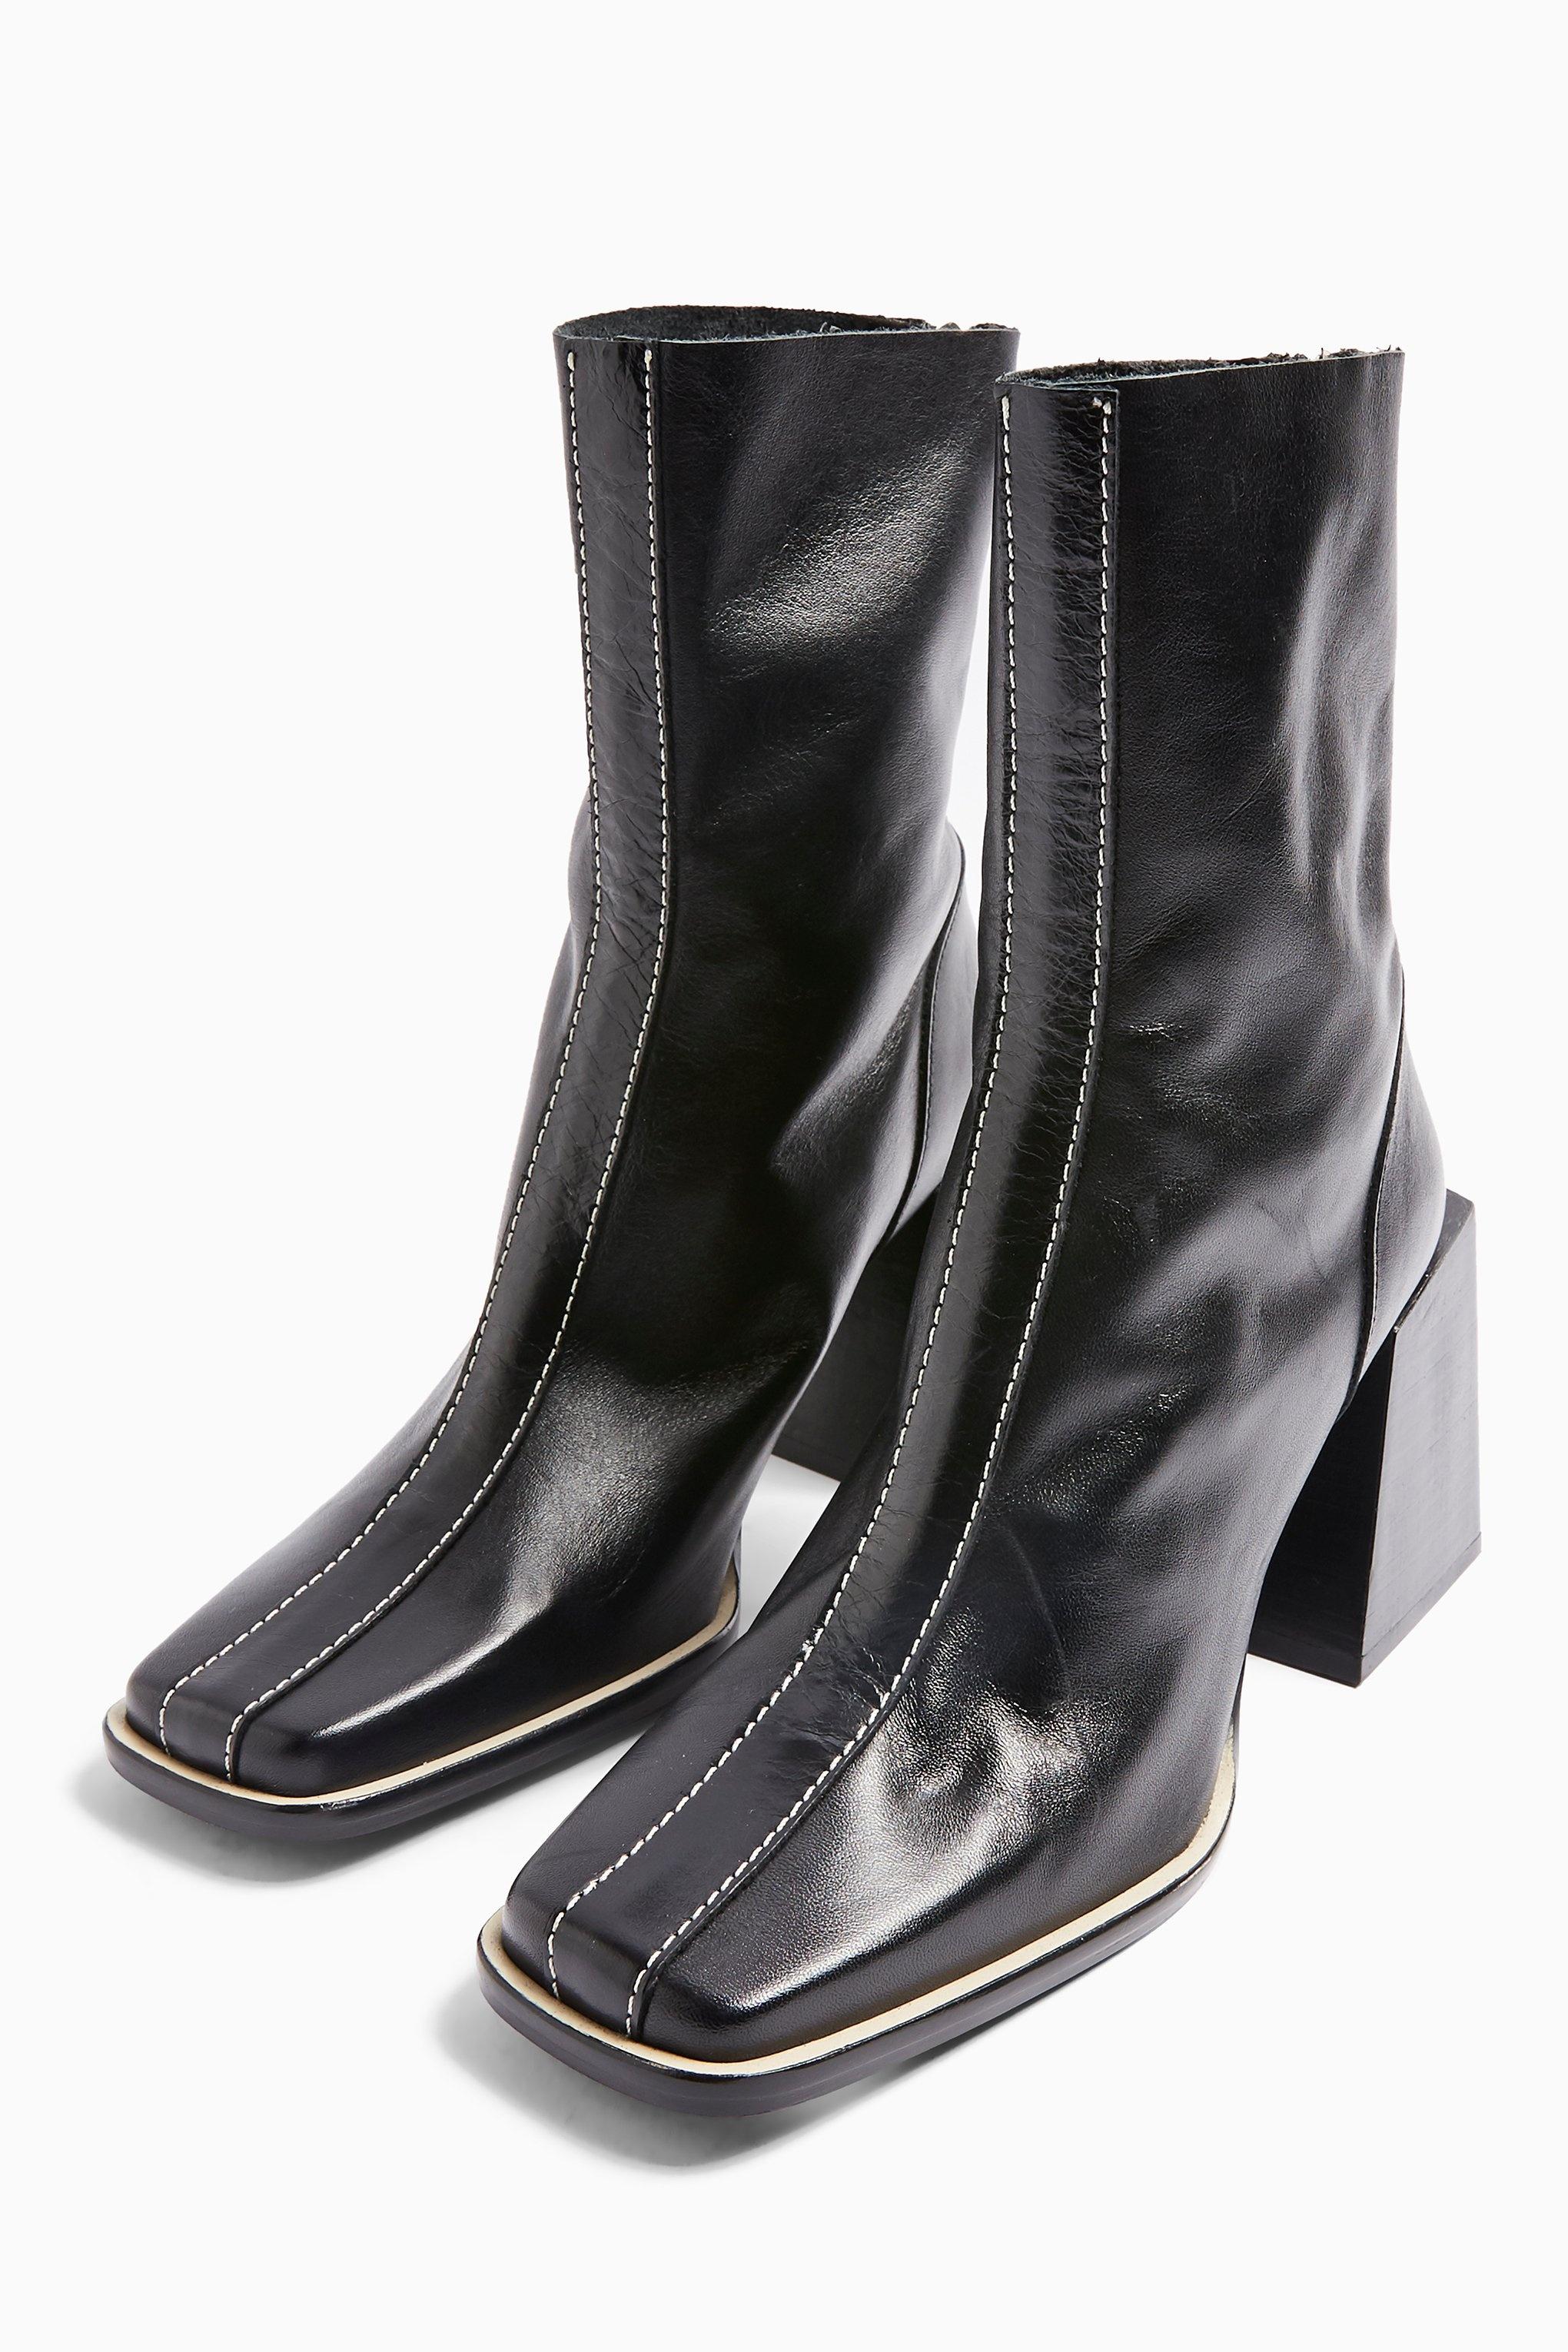 TOPSHOP Hades Leather Black Boots - Lyst